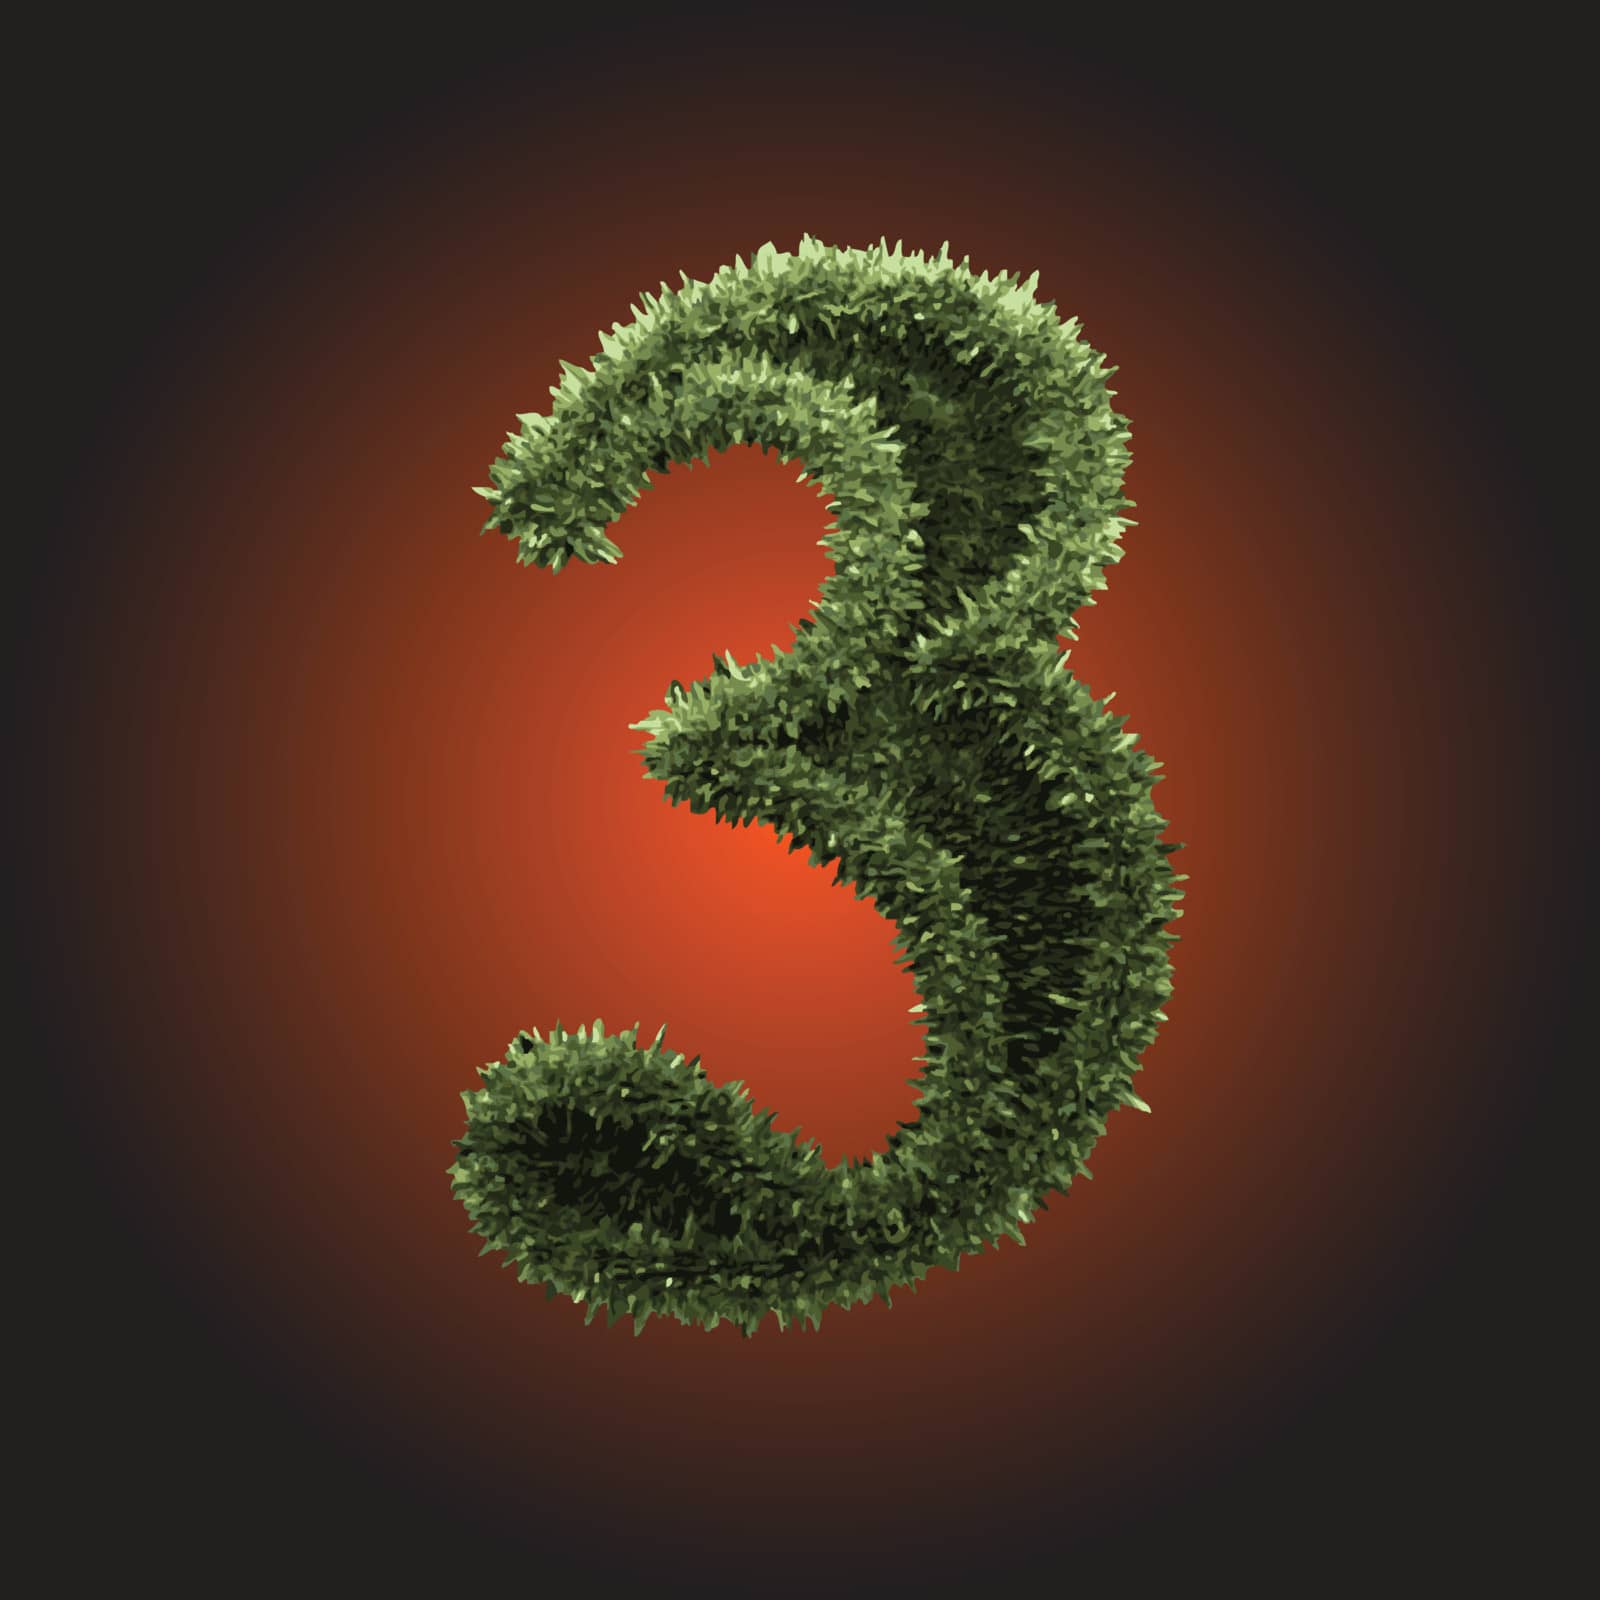 grass figure made in vector